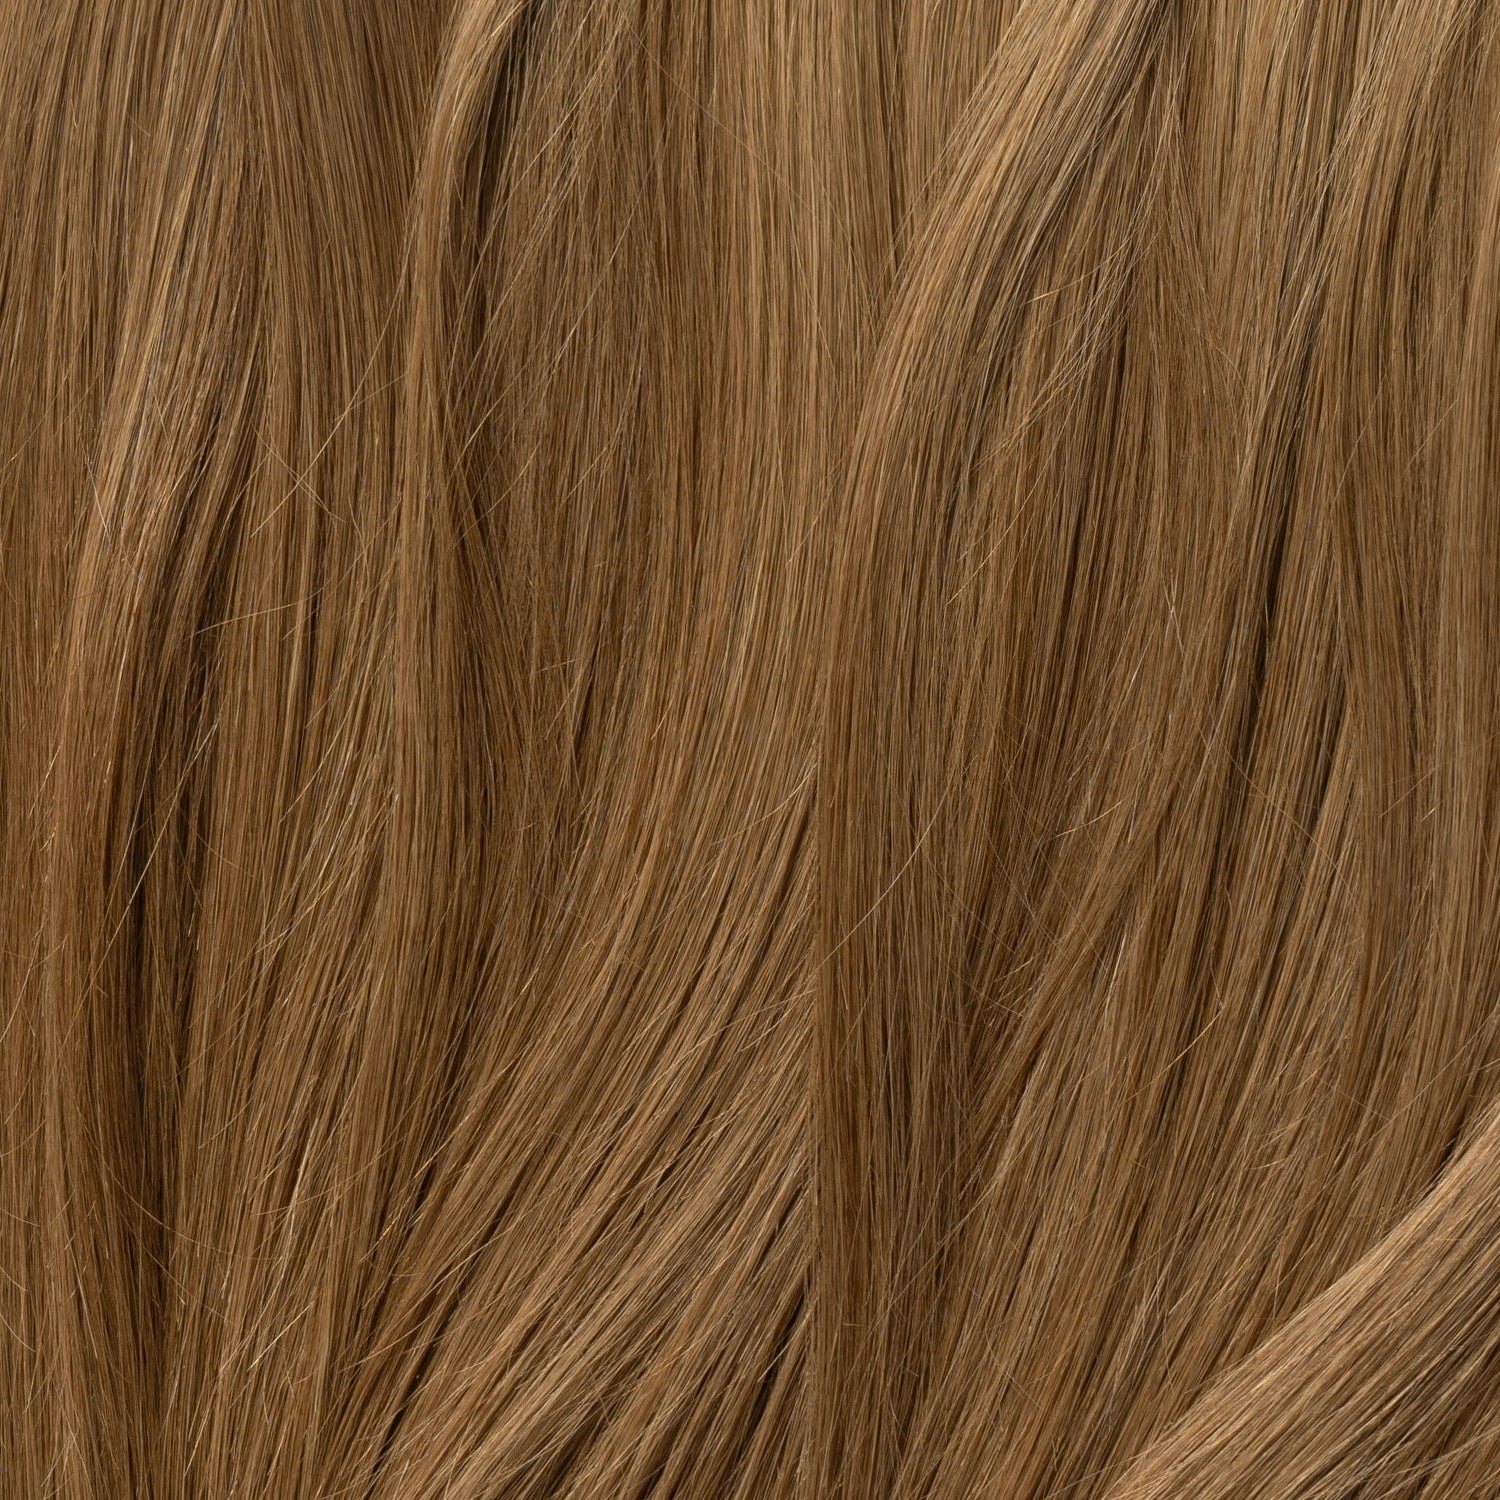 Tape in Extensions - Light Natural Brown 5